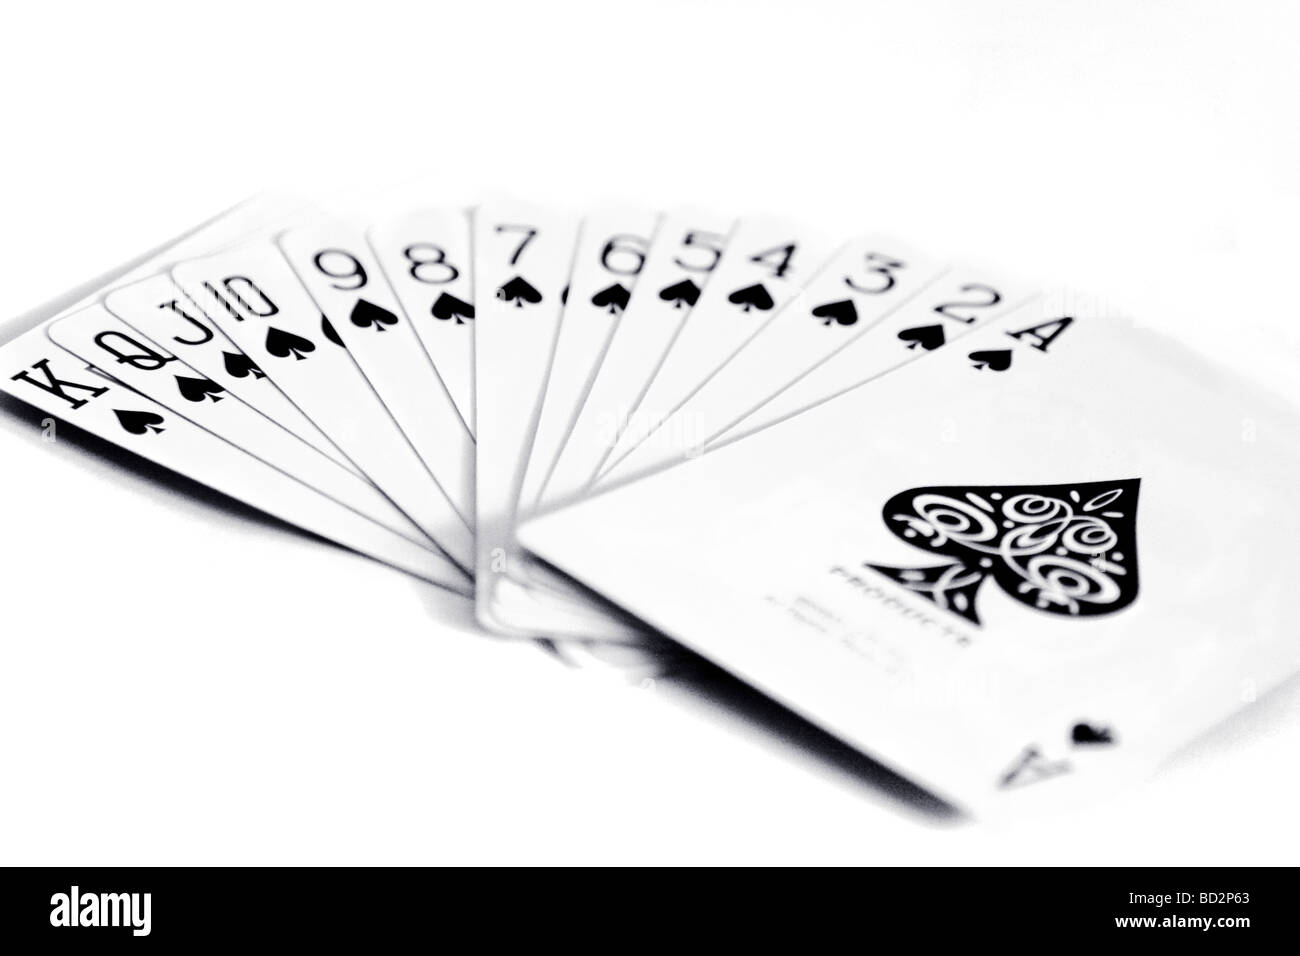 Spades suit from playing card deck Stock Photo